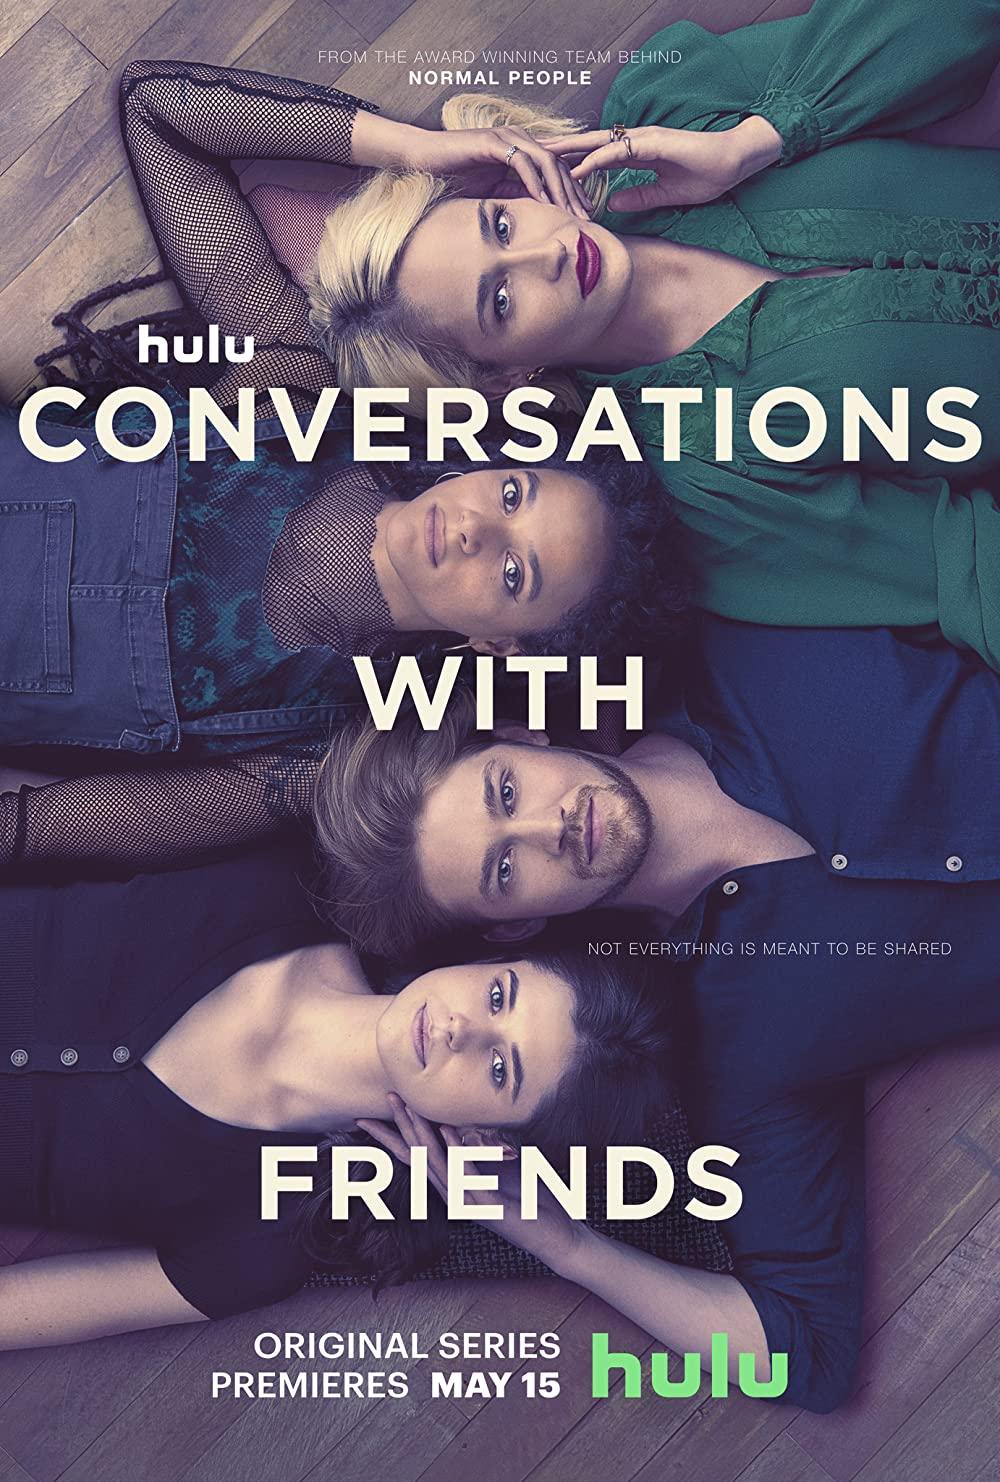 Conversations with Friends film poster